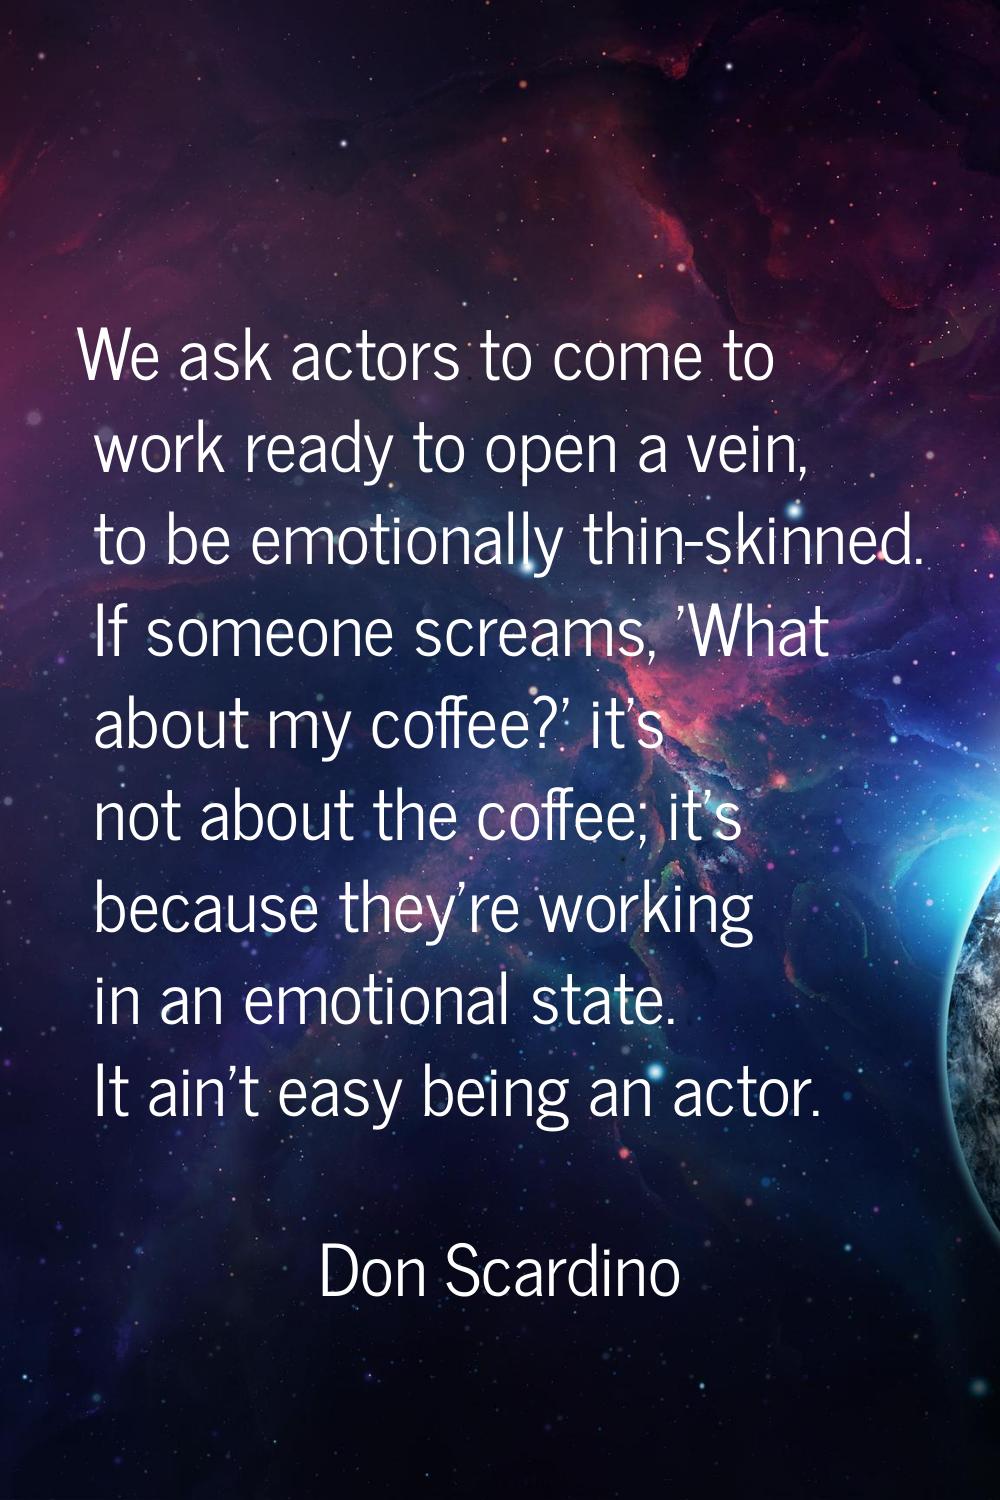 We ask actors to come to work ready to open a vein, to be emotionally thin-skinned. If someone scre